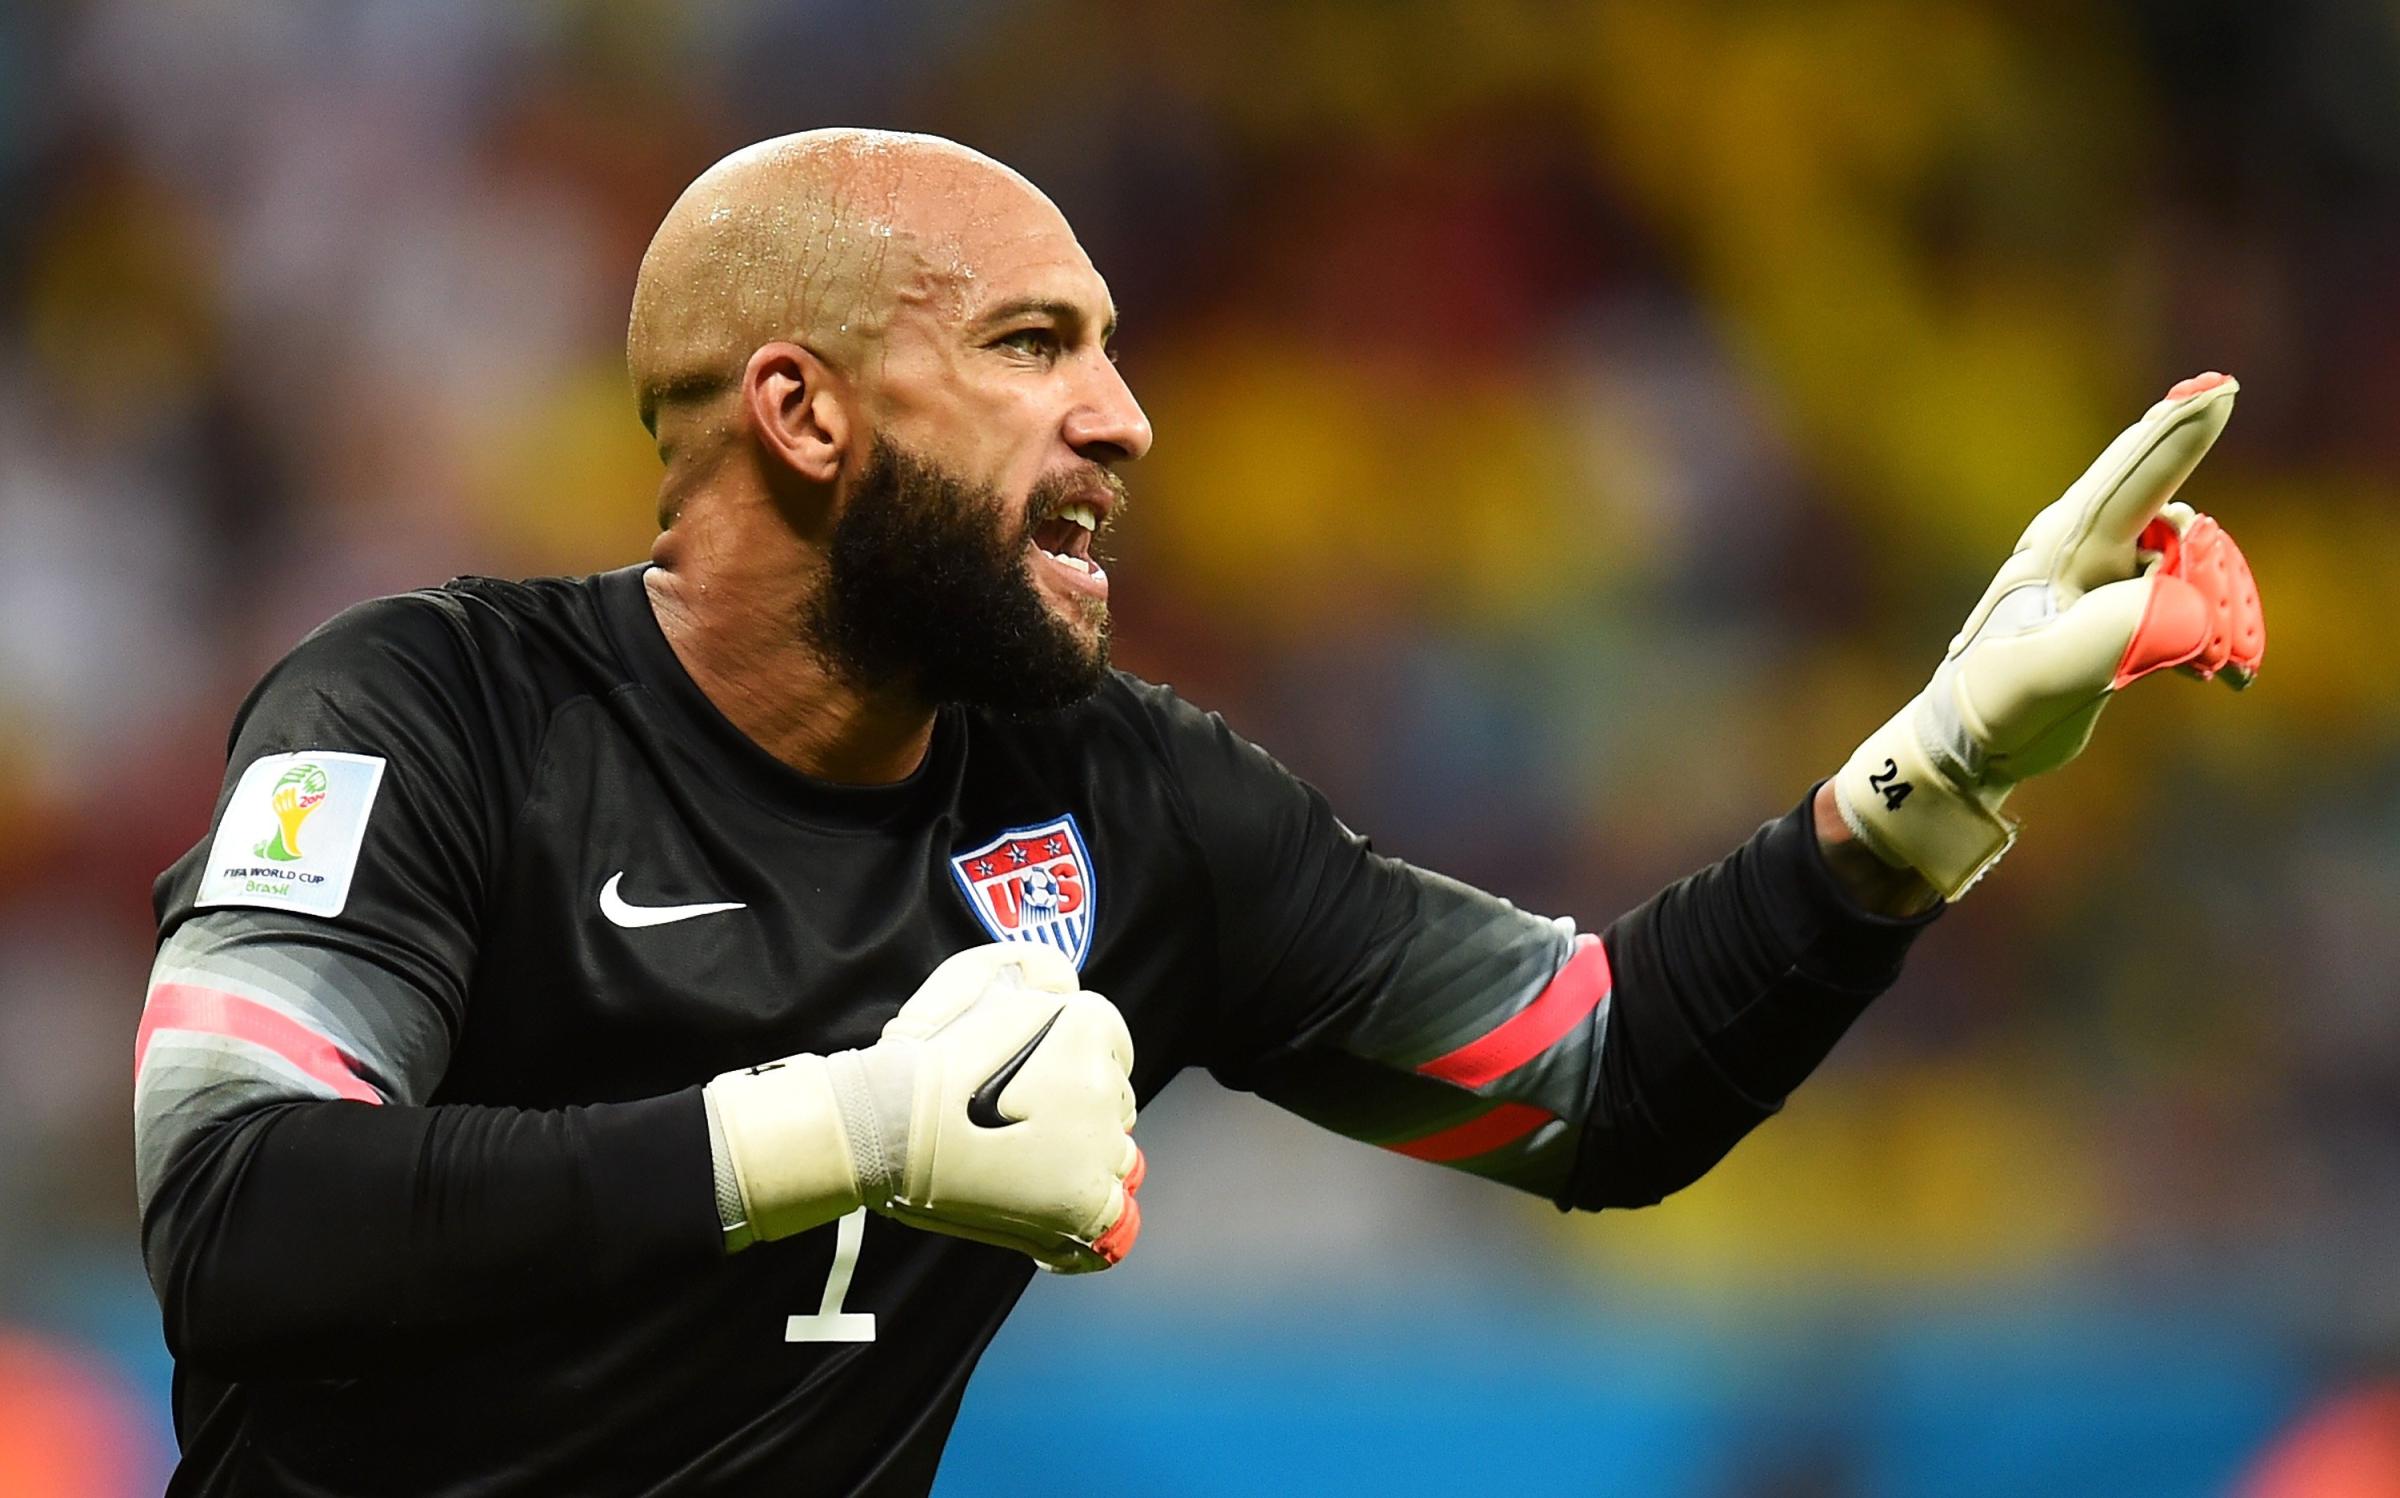 Tim Howard of the United States reacts during the 2014 FIFA World Cup Brazil Round of 16 match between Belgium and the United States at Arena Fonte Nova on July 1, 2014 in Salvador, Brazil.